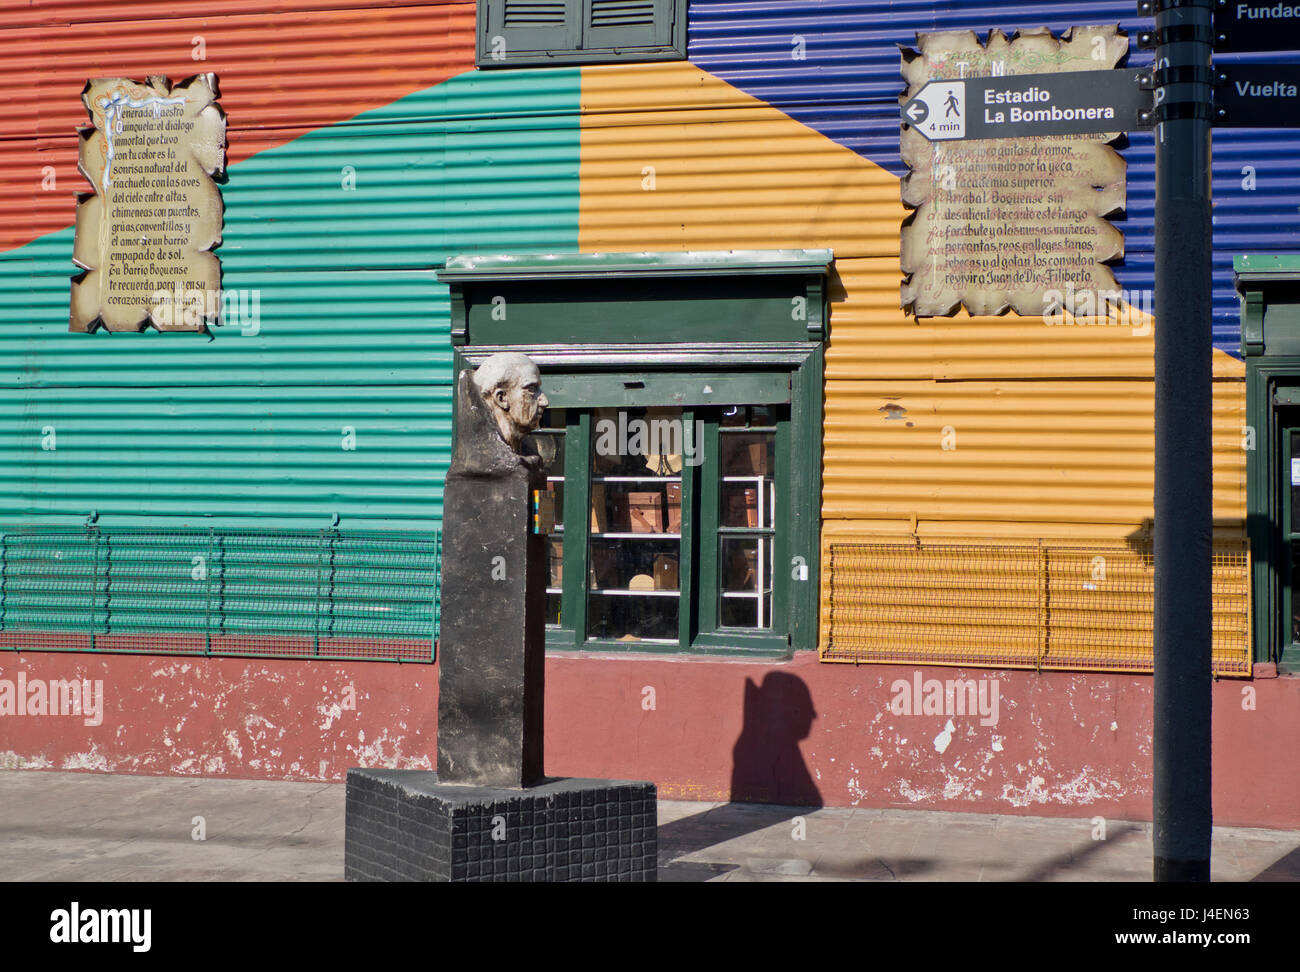 Statue of famous local painter Quinquela Martin at Caminito alley in the Boca, old Italian quarter of Buenos Aires, Argentina Stock Photo